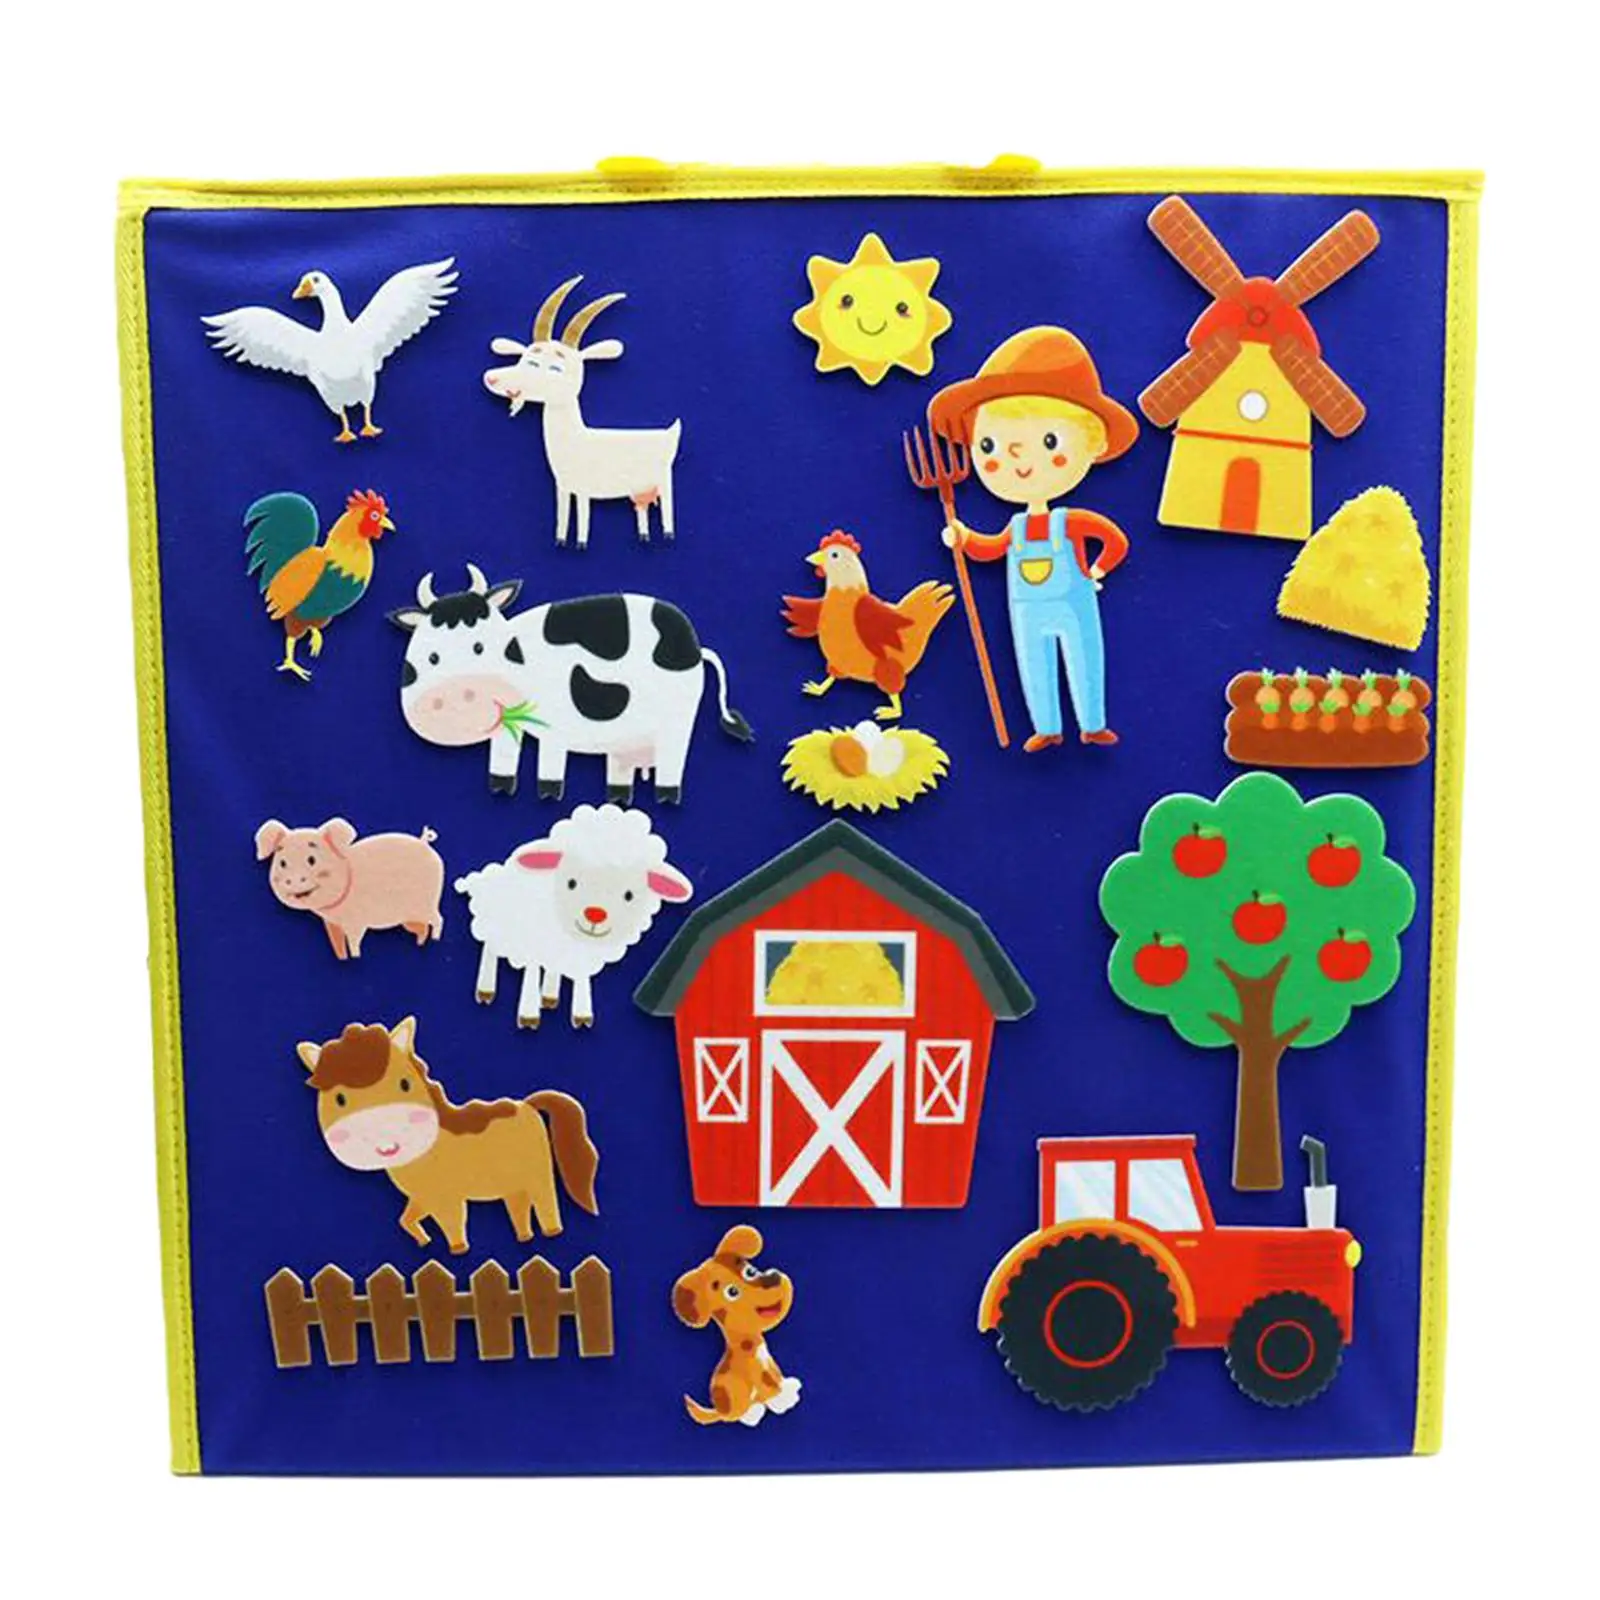 Felt Flannel Board Quiet Book Travel Toys, Household Party Gift for 3+ Years Old Arts and Crafts Felt Board for Toddlers